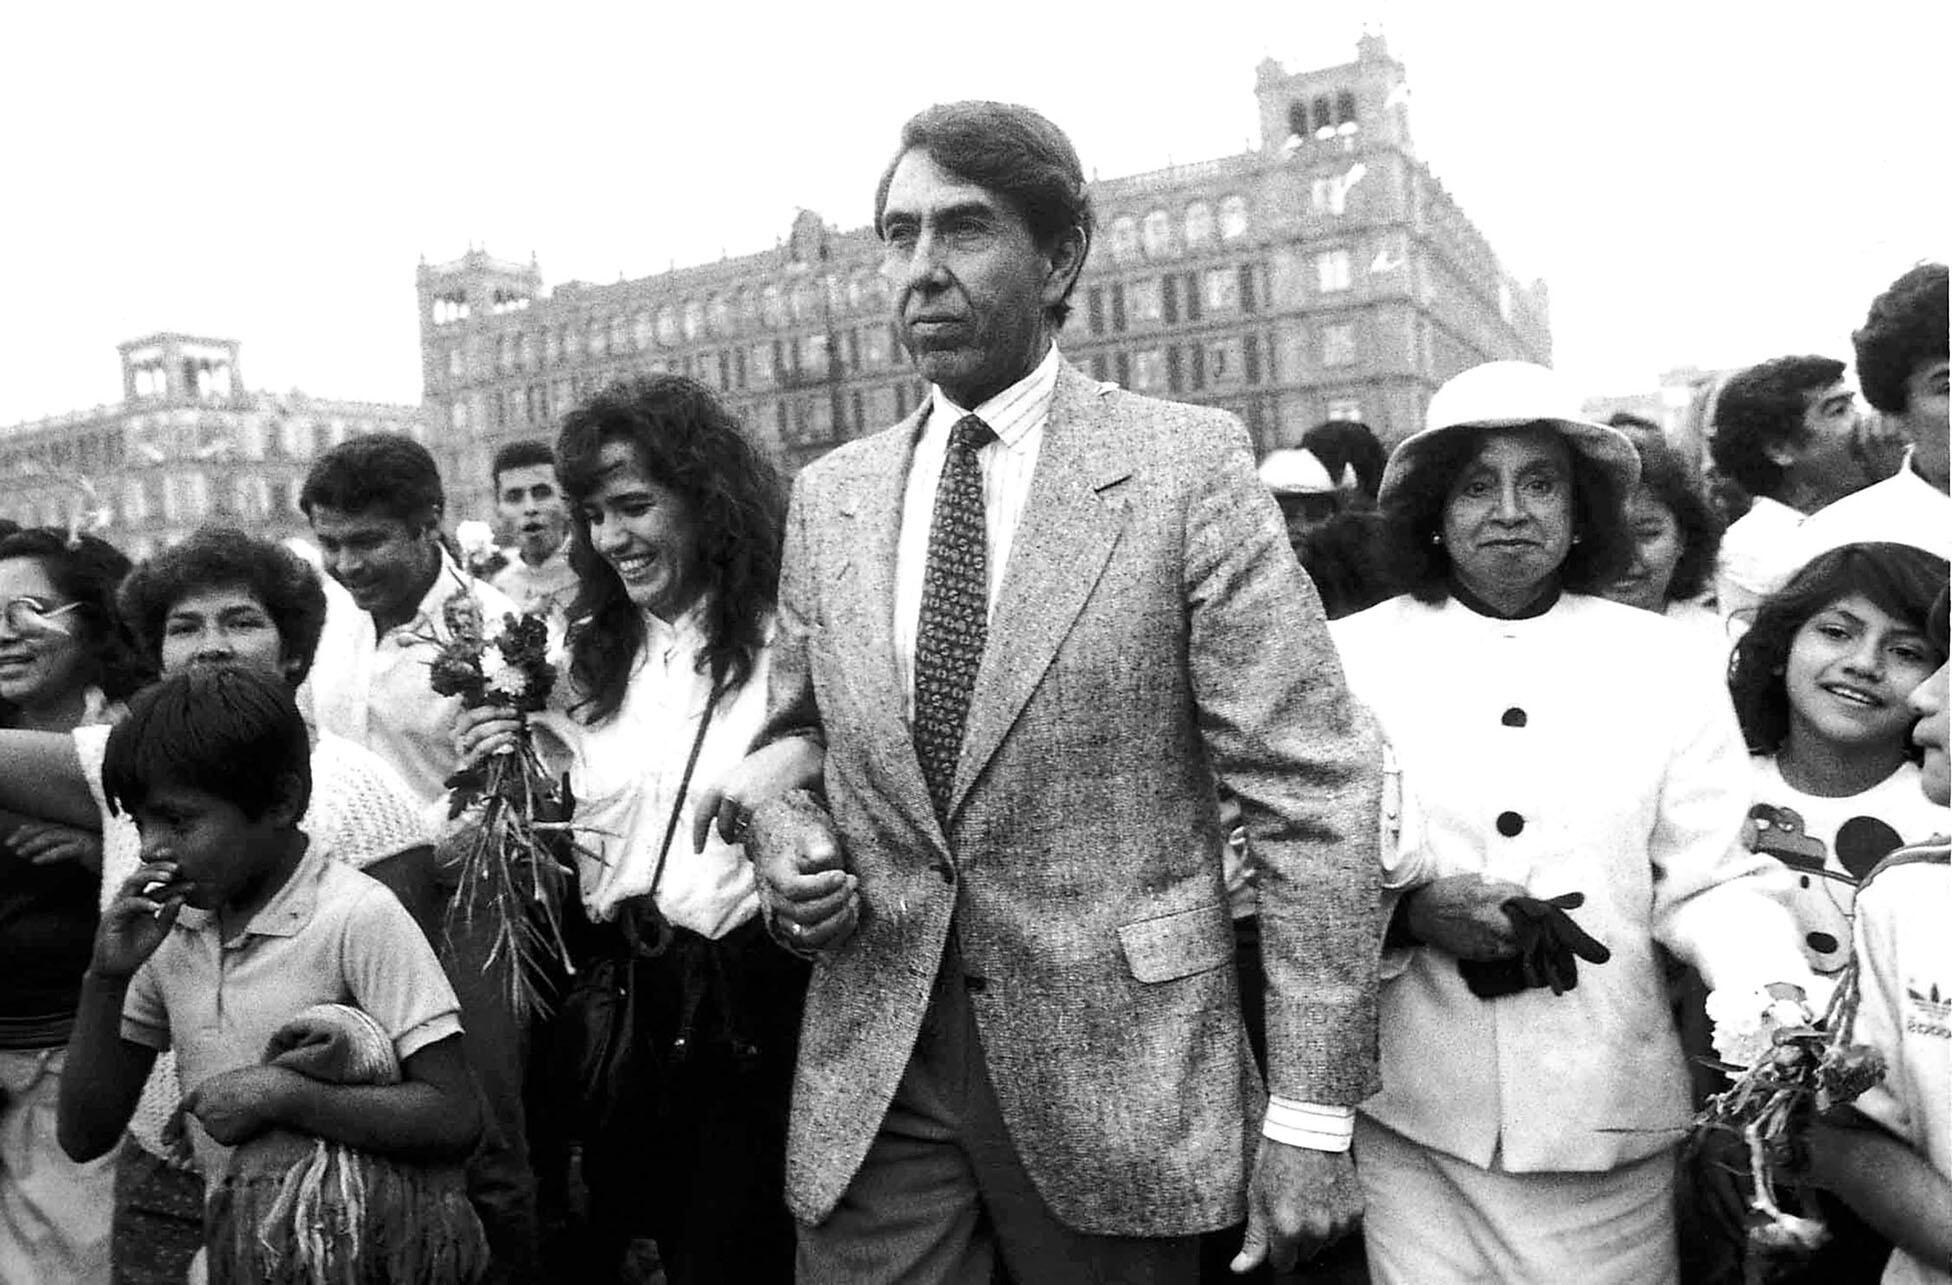 Cuauhtémoc Cárdenas campaigning during his 1988 presidential bid in Mexico. (Photo from WikiMexico.)